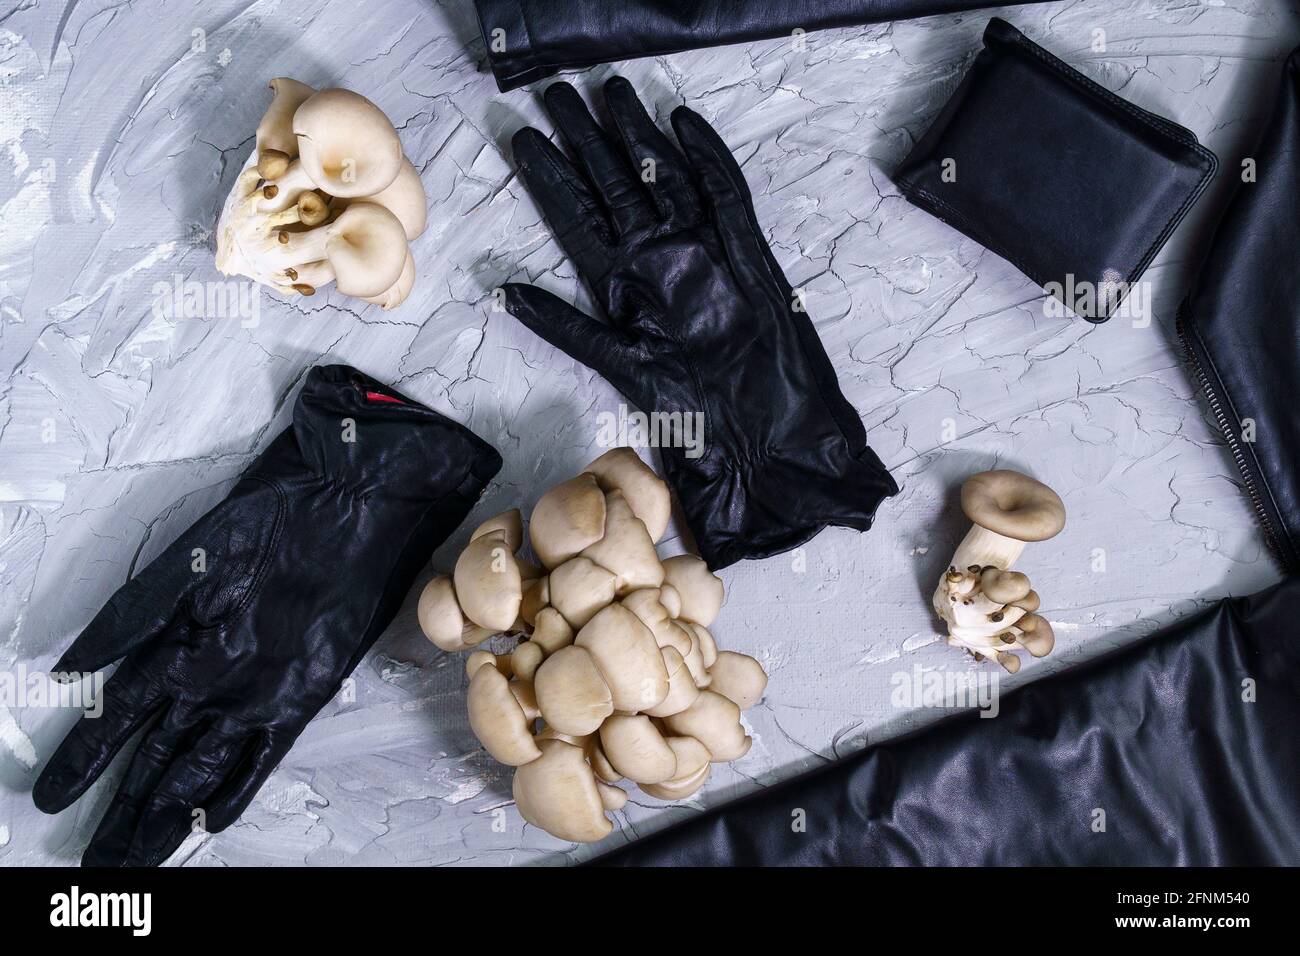 Mushroom eco leather things with oyster mushrooms. eco-friendly alternative to skin made from fungal spores and plant fibers on a biological basis Stock Photo